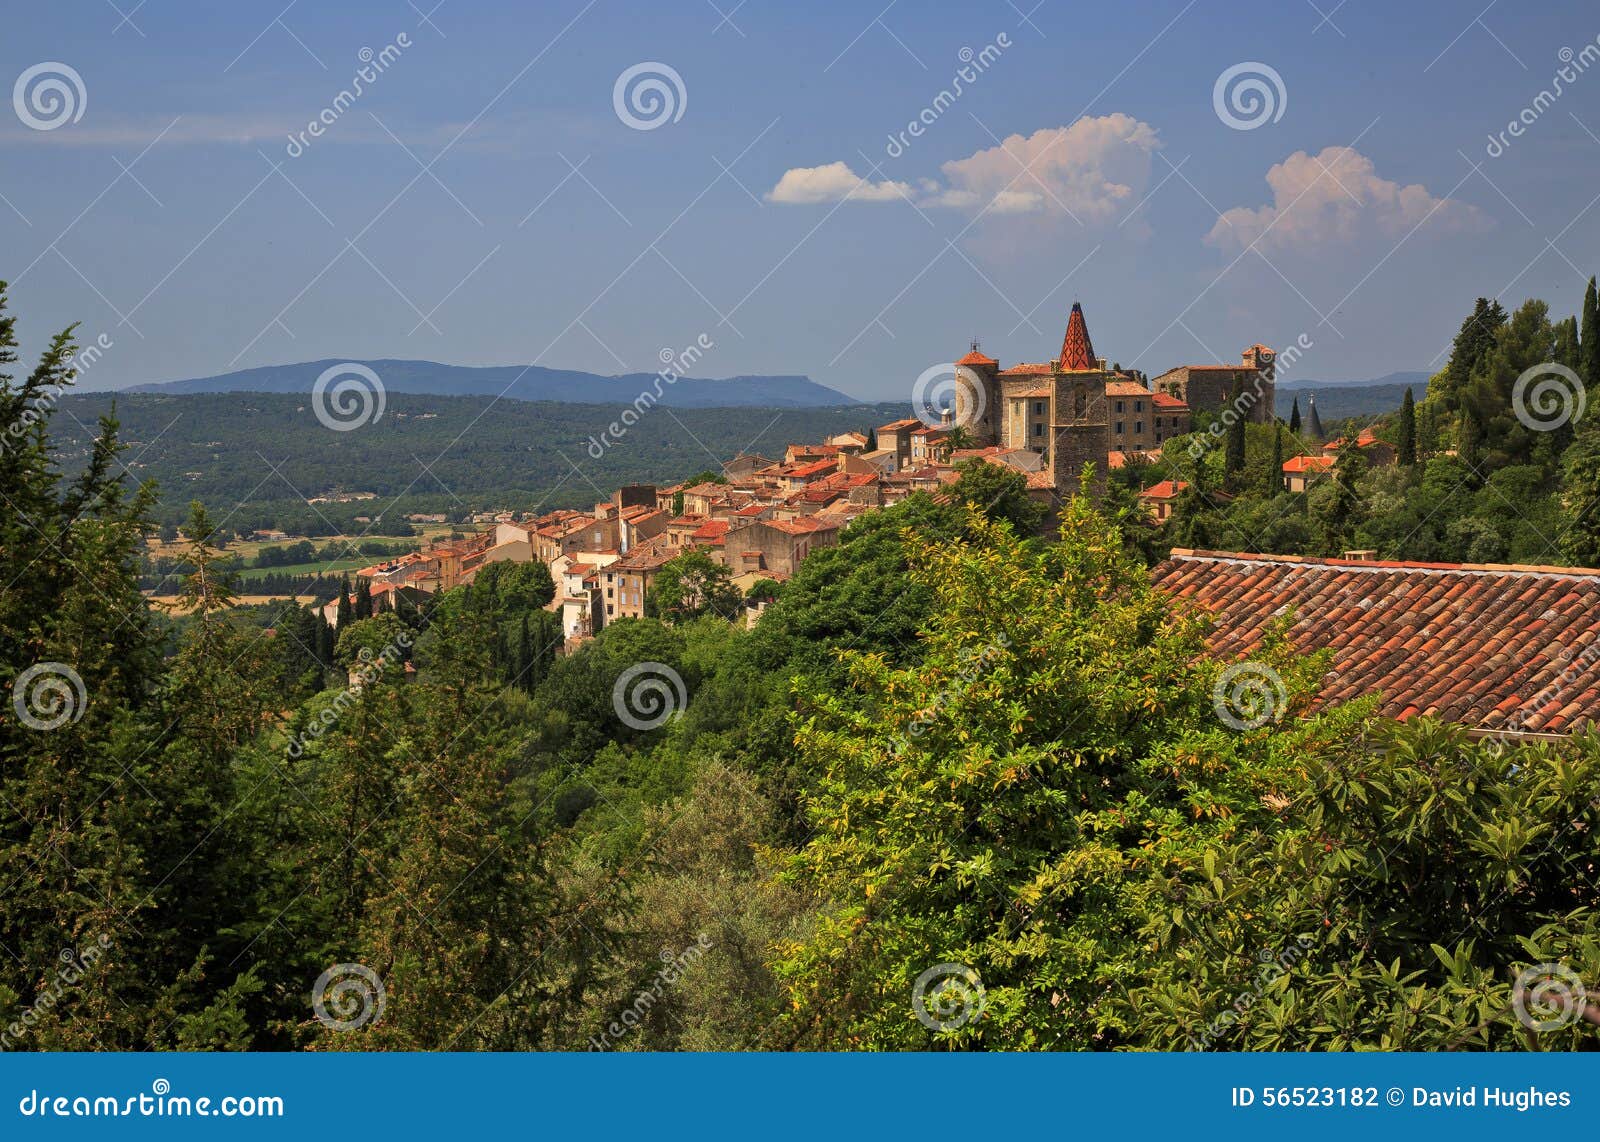 ancient turrets and towers of the beautiful medieval french mountain village of callian